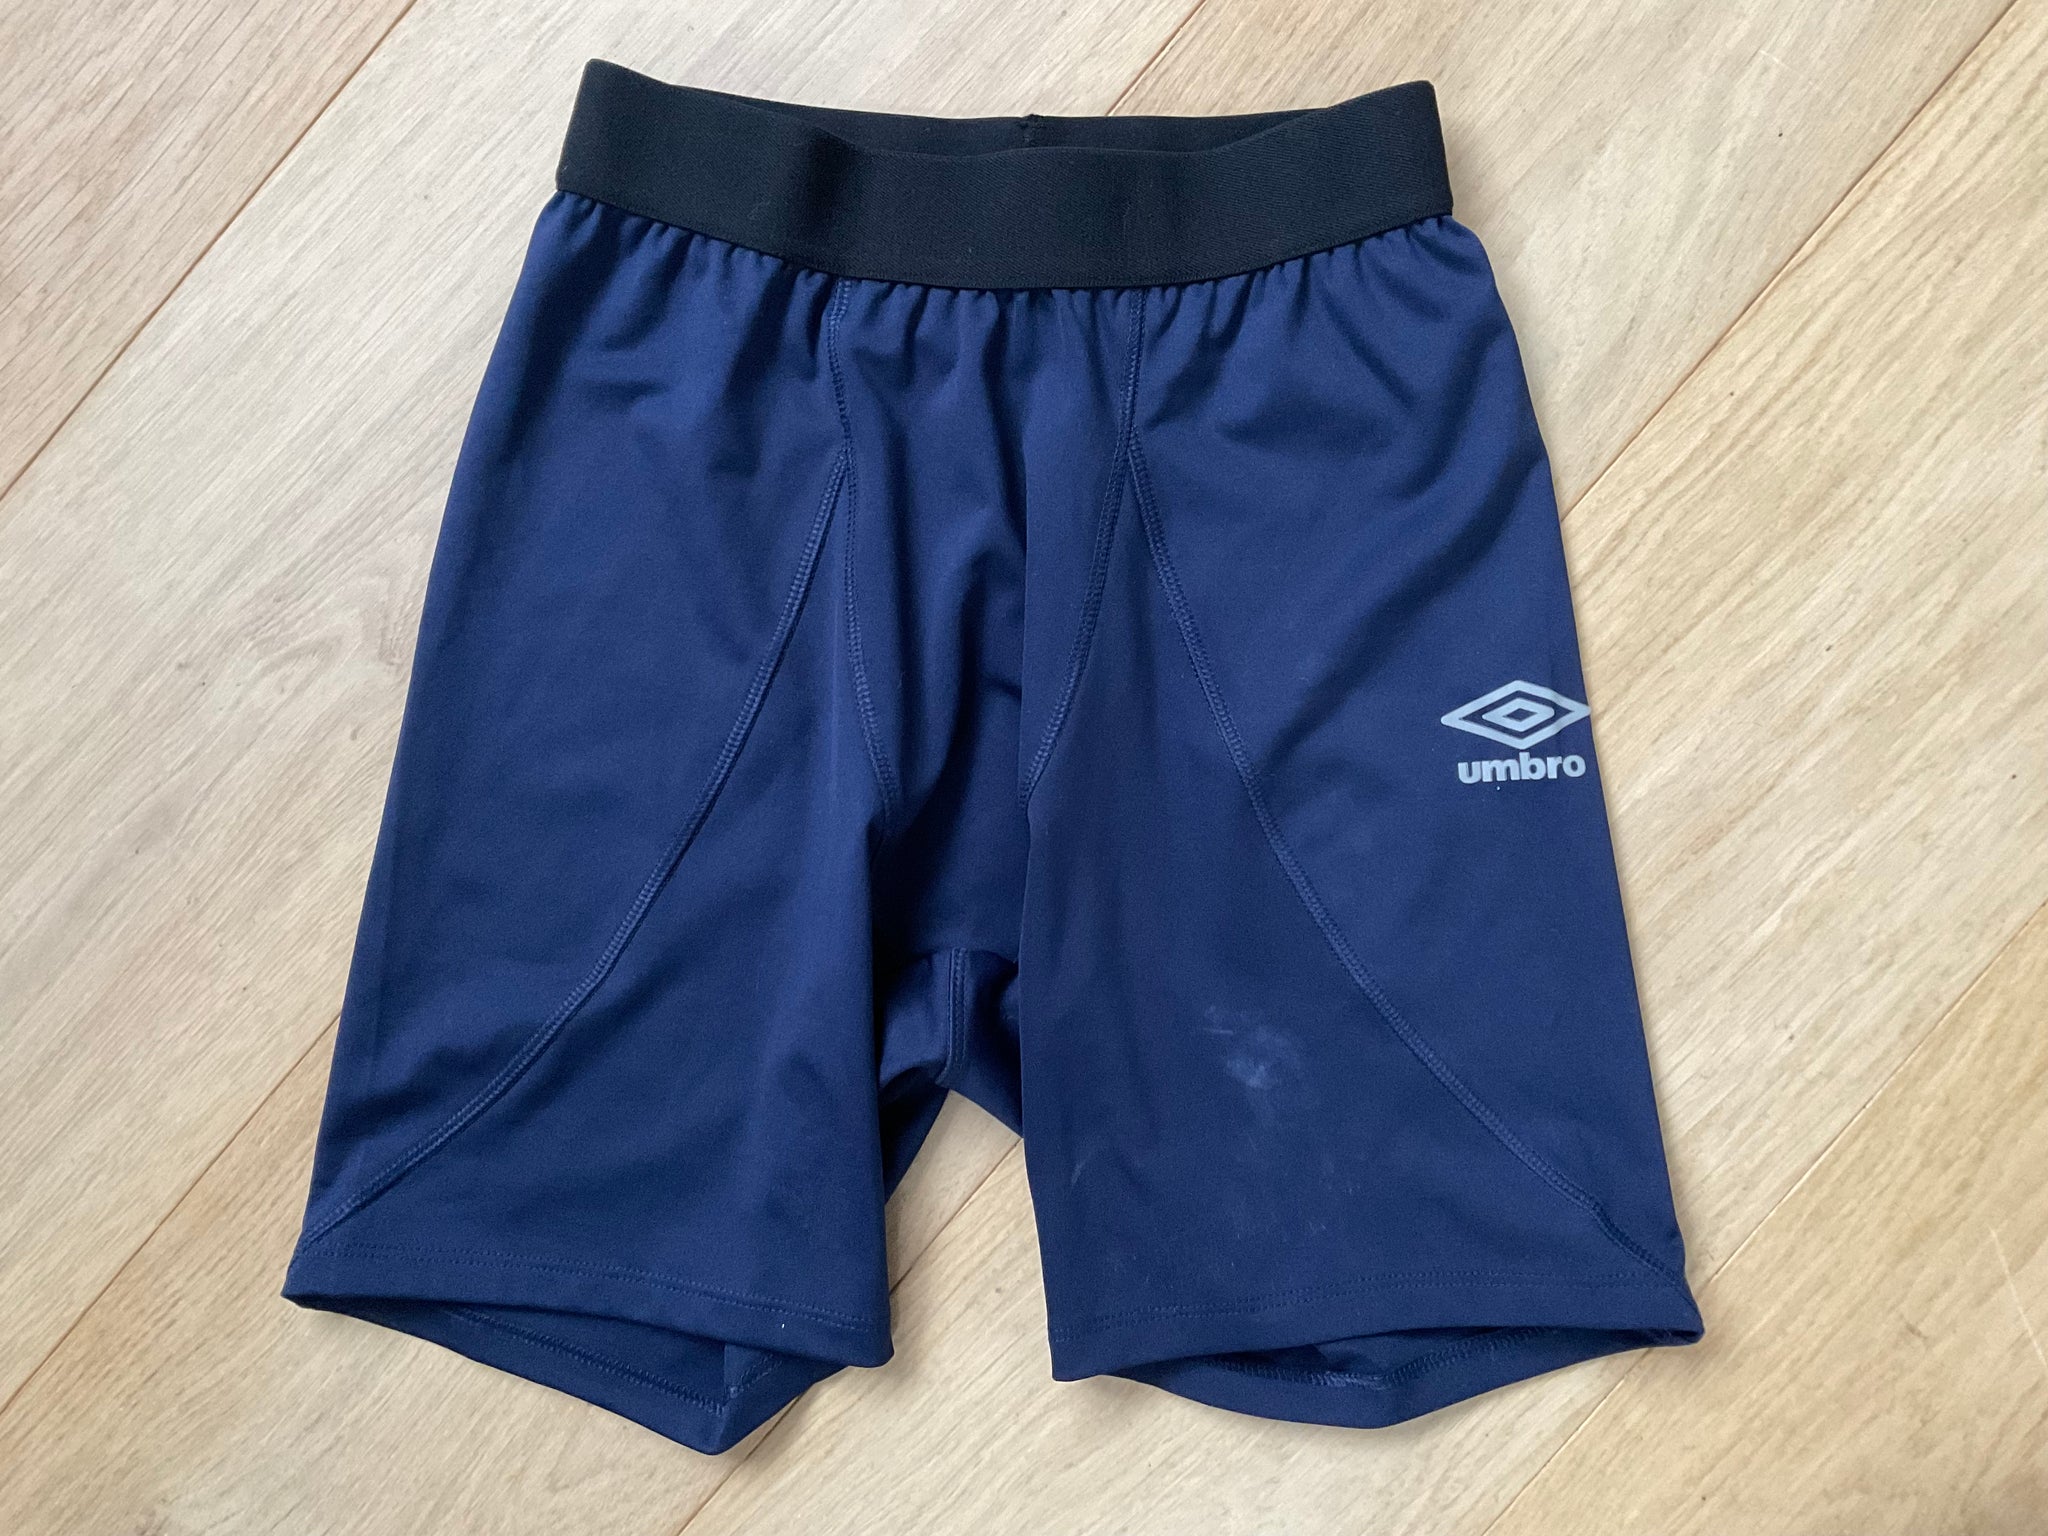 England Rugby - Base Layer Shorts [Blue & Black]